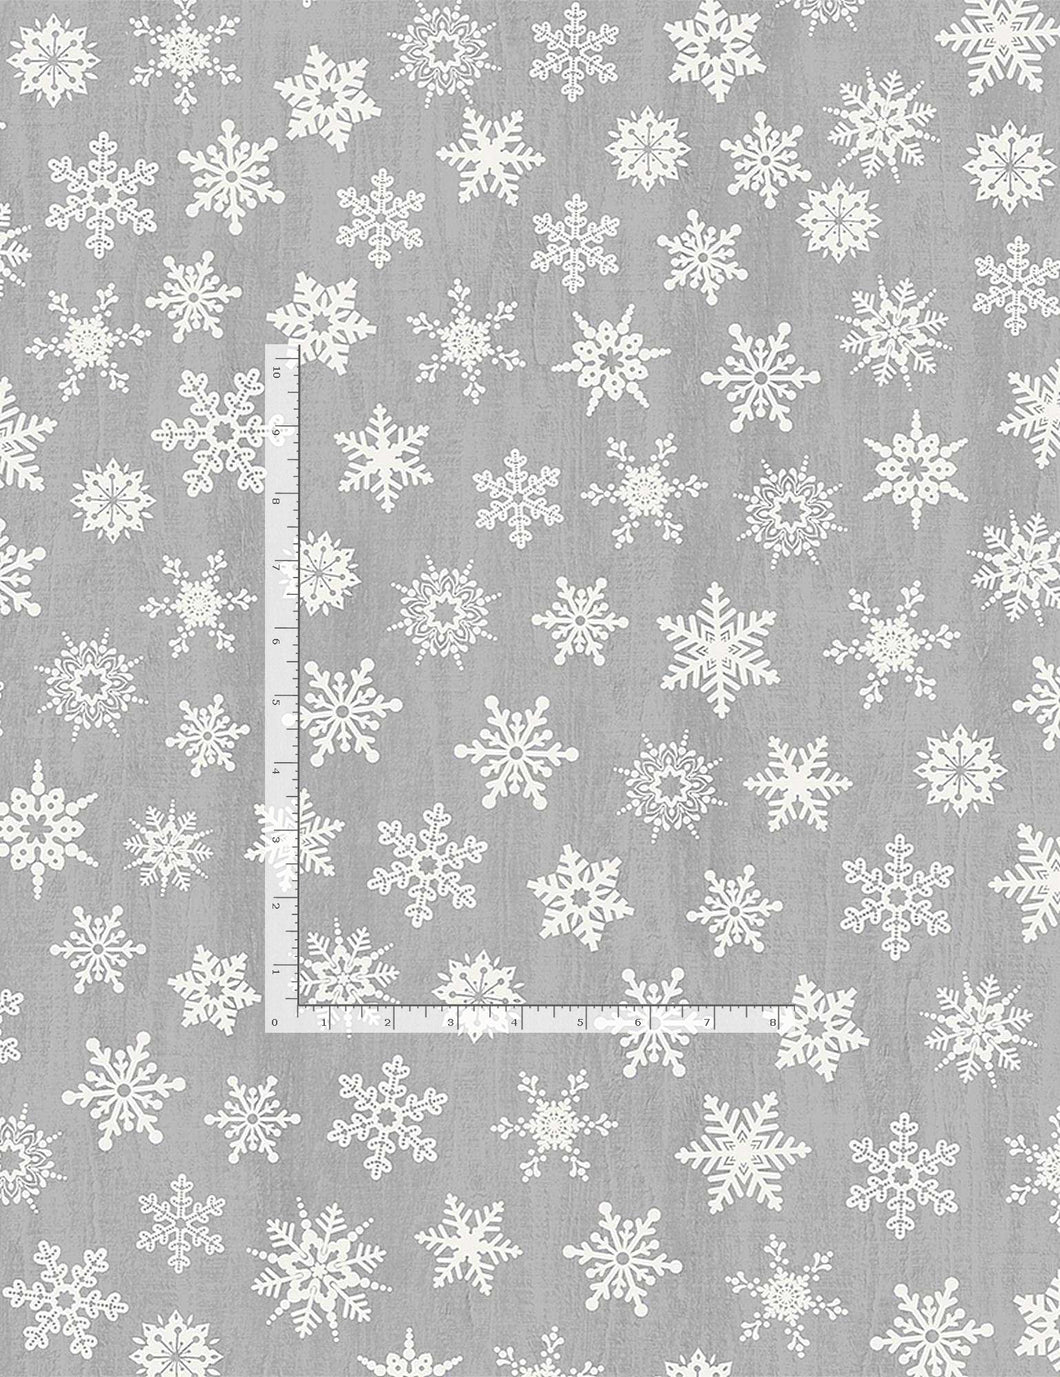 SNOWFLAKES by Gail Cadden from SNOW GNOMES Collection